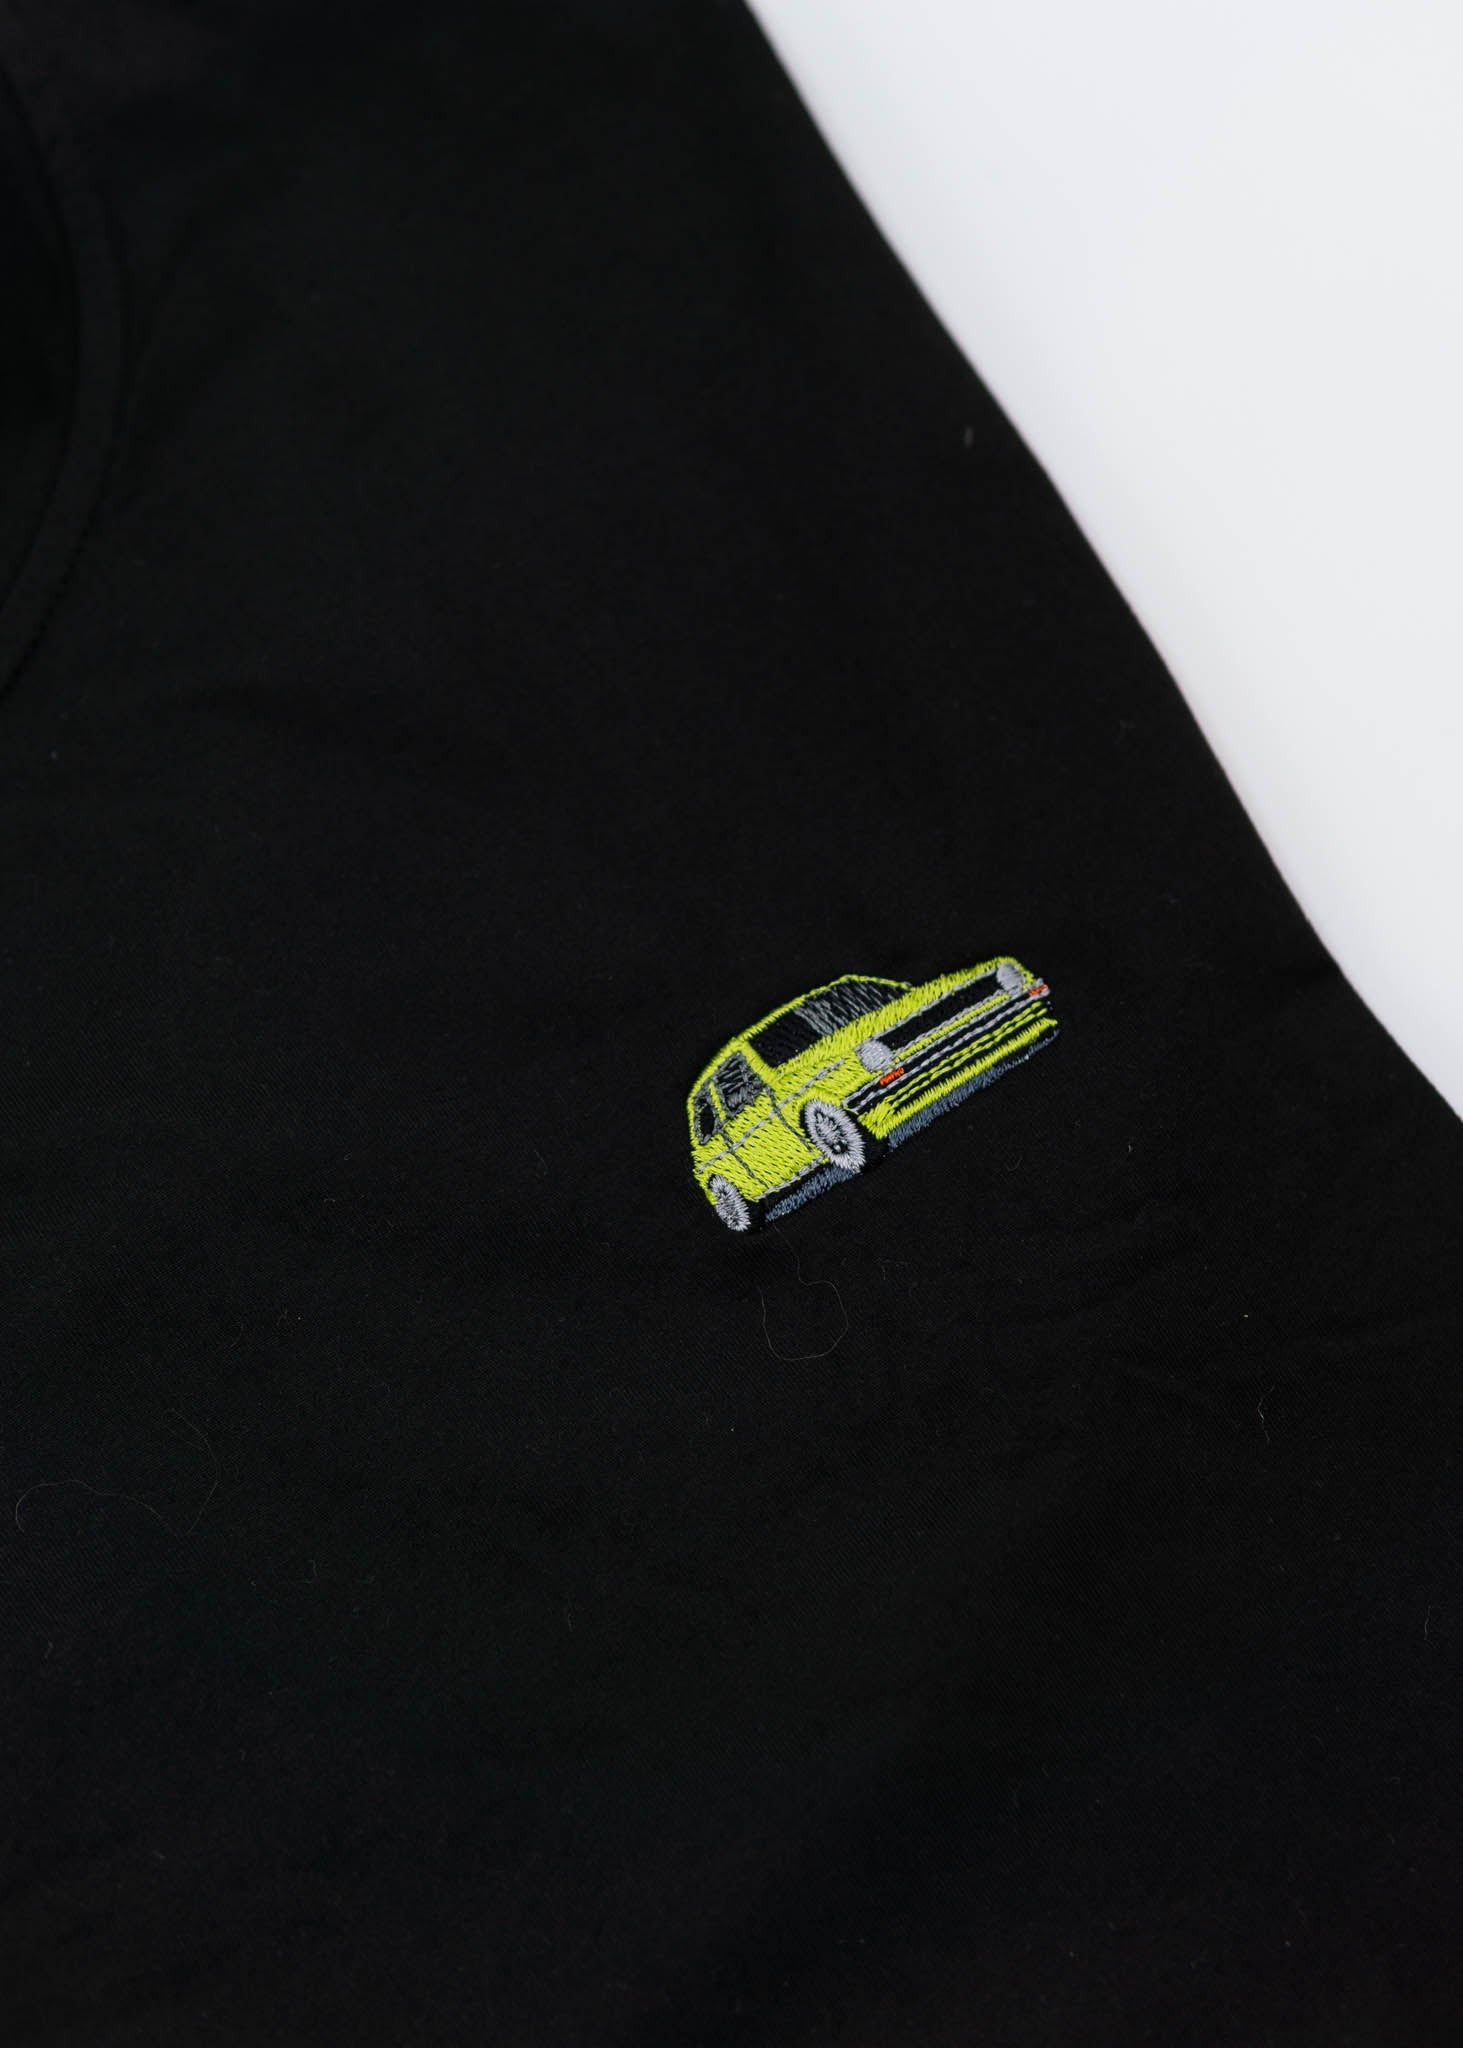 A black VW VolkswagenT-Shirt for men. Photo is a close up of the shirt with an embroidered modified green Mk1 Golf. Fabric composition is 100% polyester. The material is very stretchy, soft, comfortable, breathable, and non-transparent. The style of this shirt is short sleeve, with a crewneck neckline.